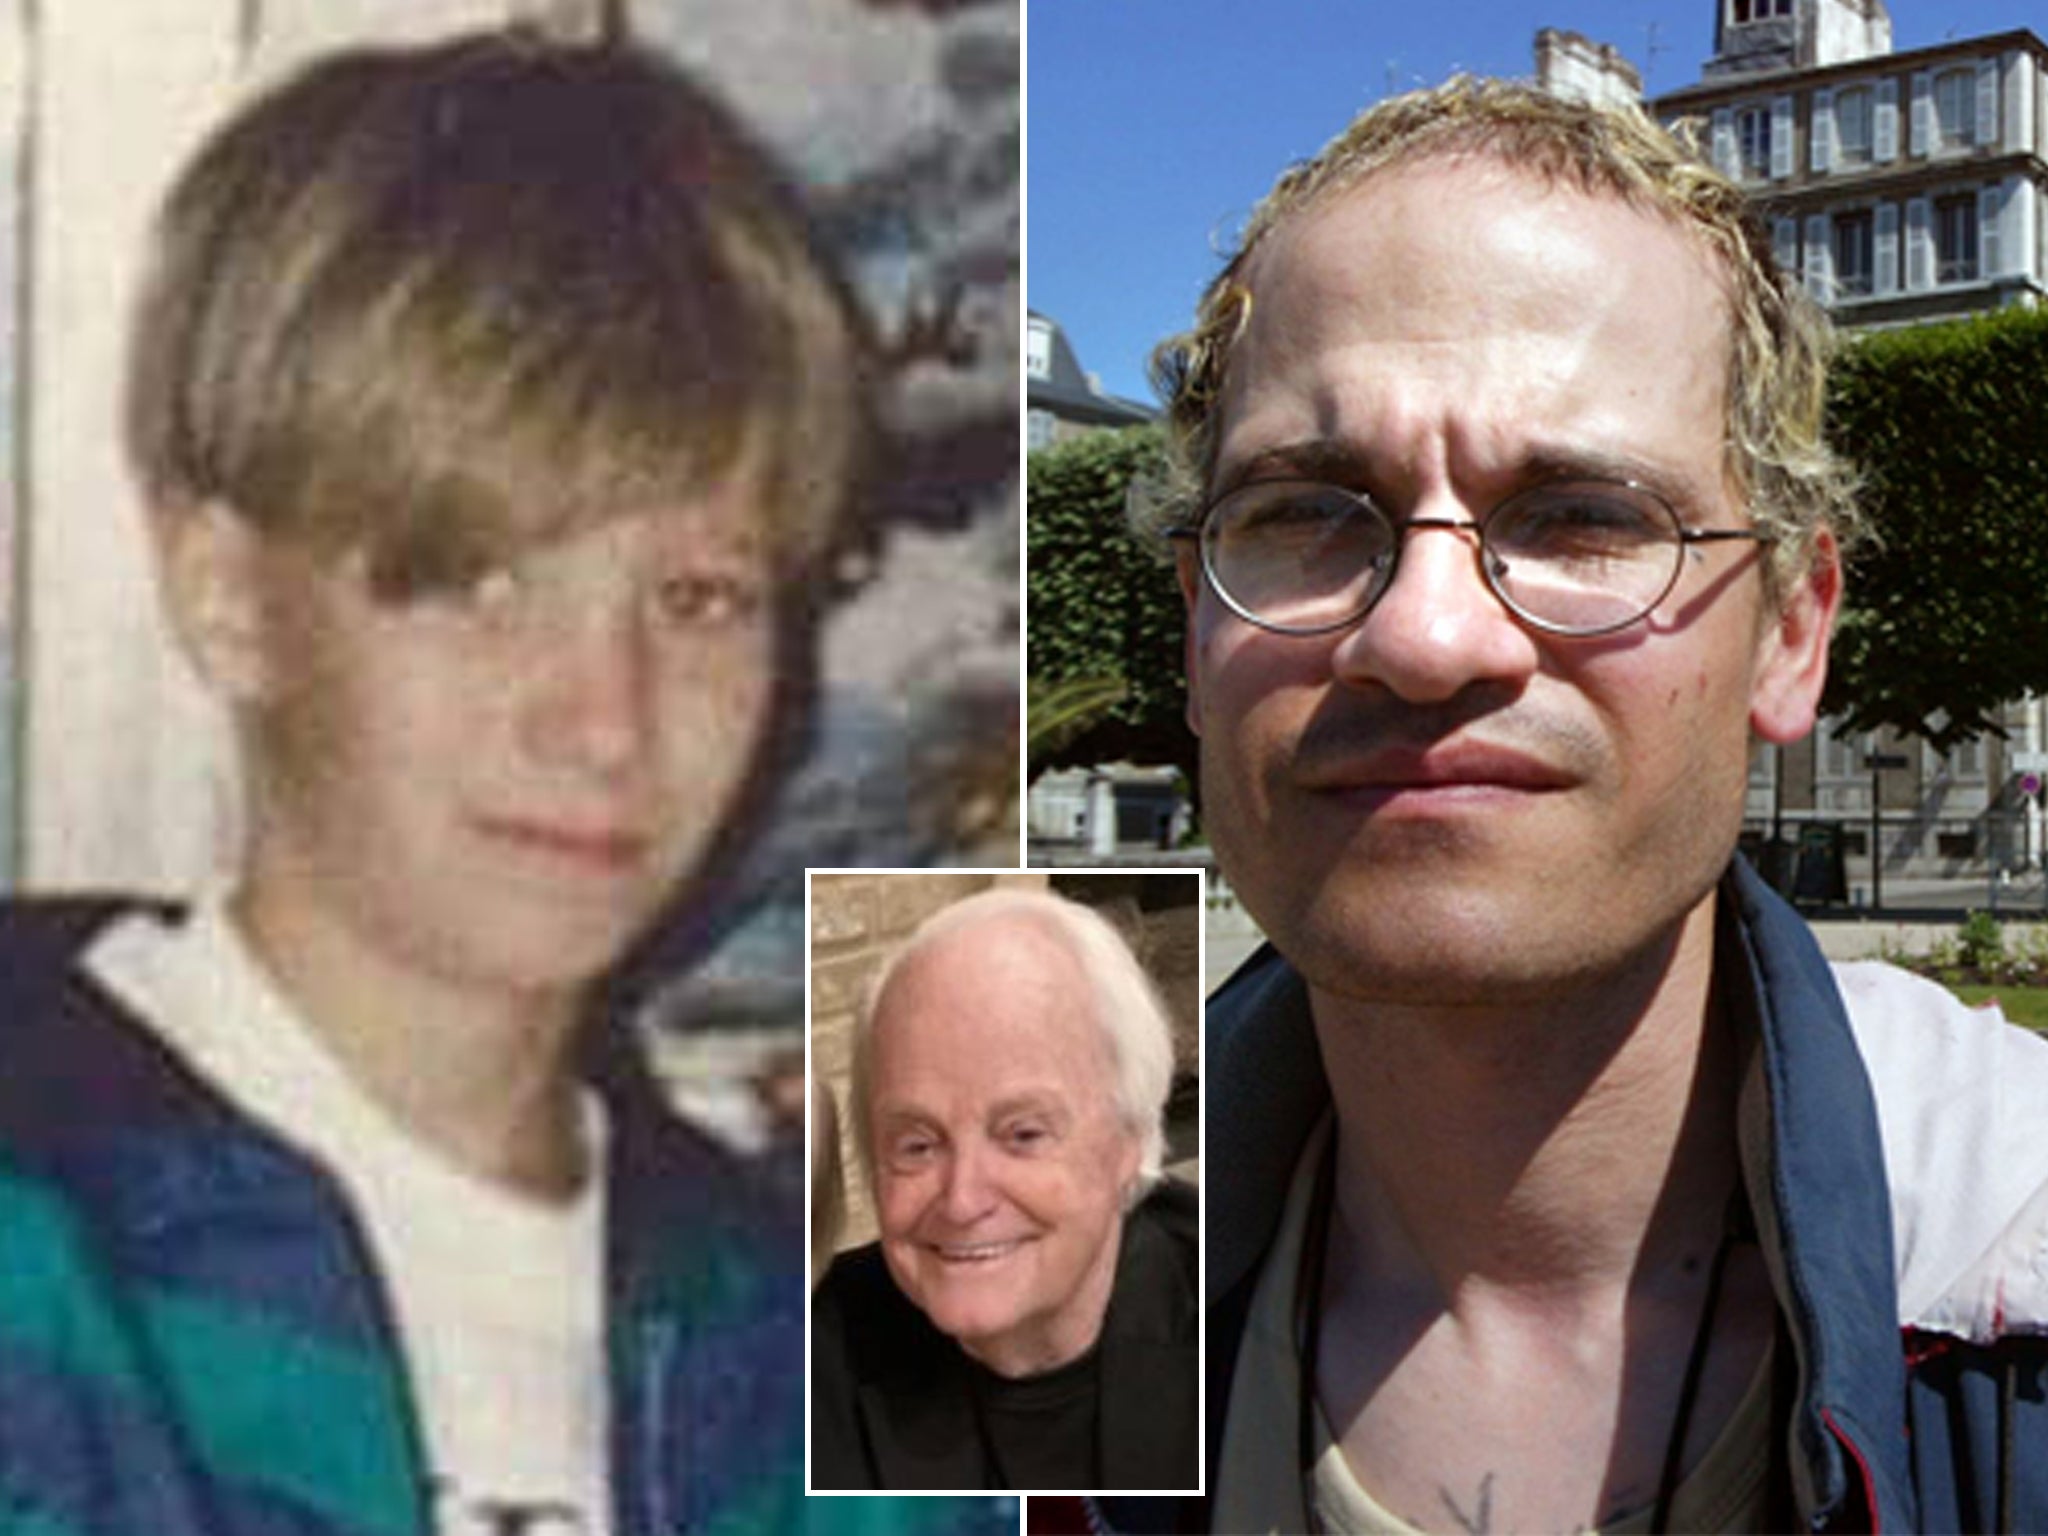 A French imposter convinced everyone he was missing Texas teen Nicholas Barclay